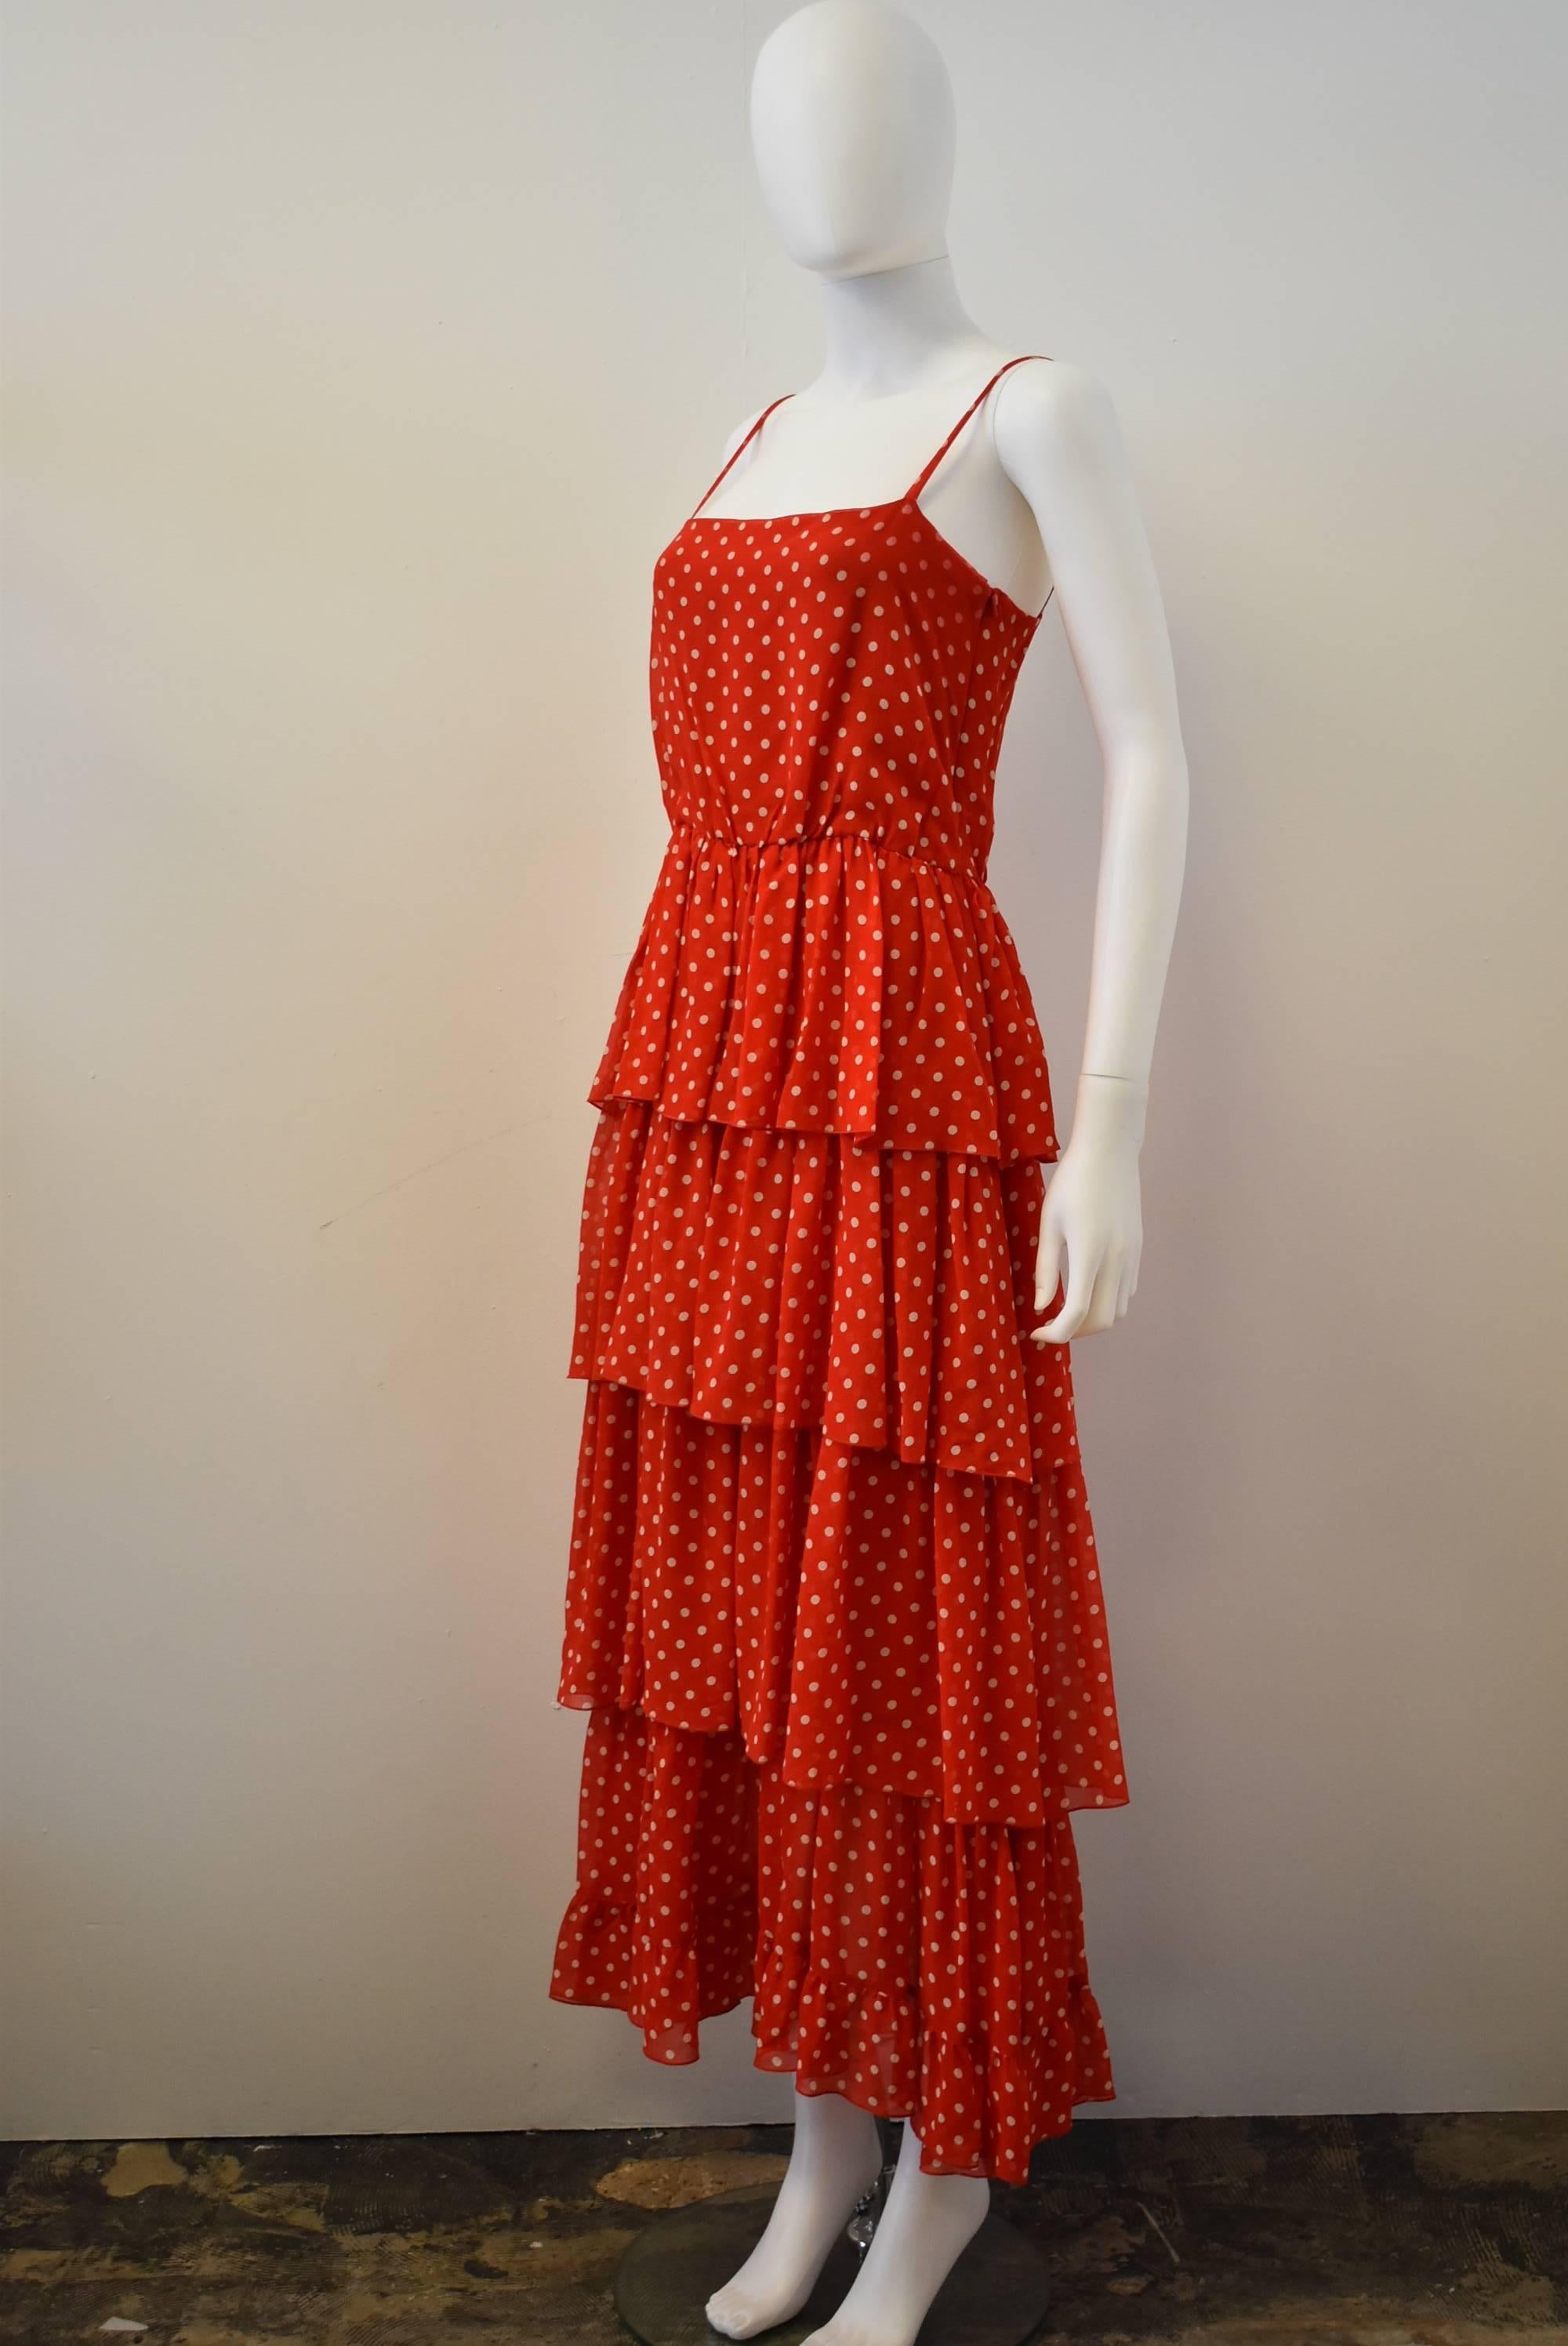 This Guy Laroche dress dates back to the 1970s. The dress is made from a red and white polka dot printed silk chiffon fabric. The dress is cut in tiered ruffles very reminiscent of the peasant style of the 70s. The dress also has spaghetti straps,